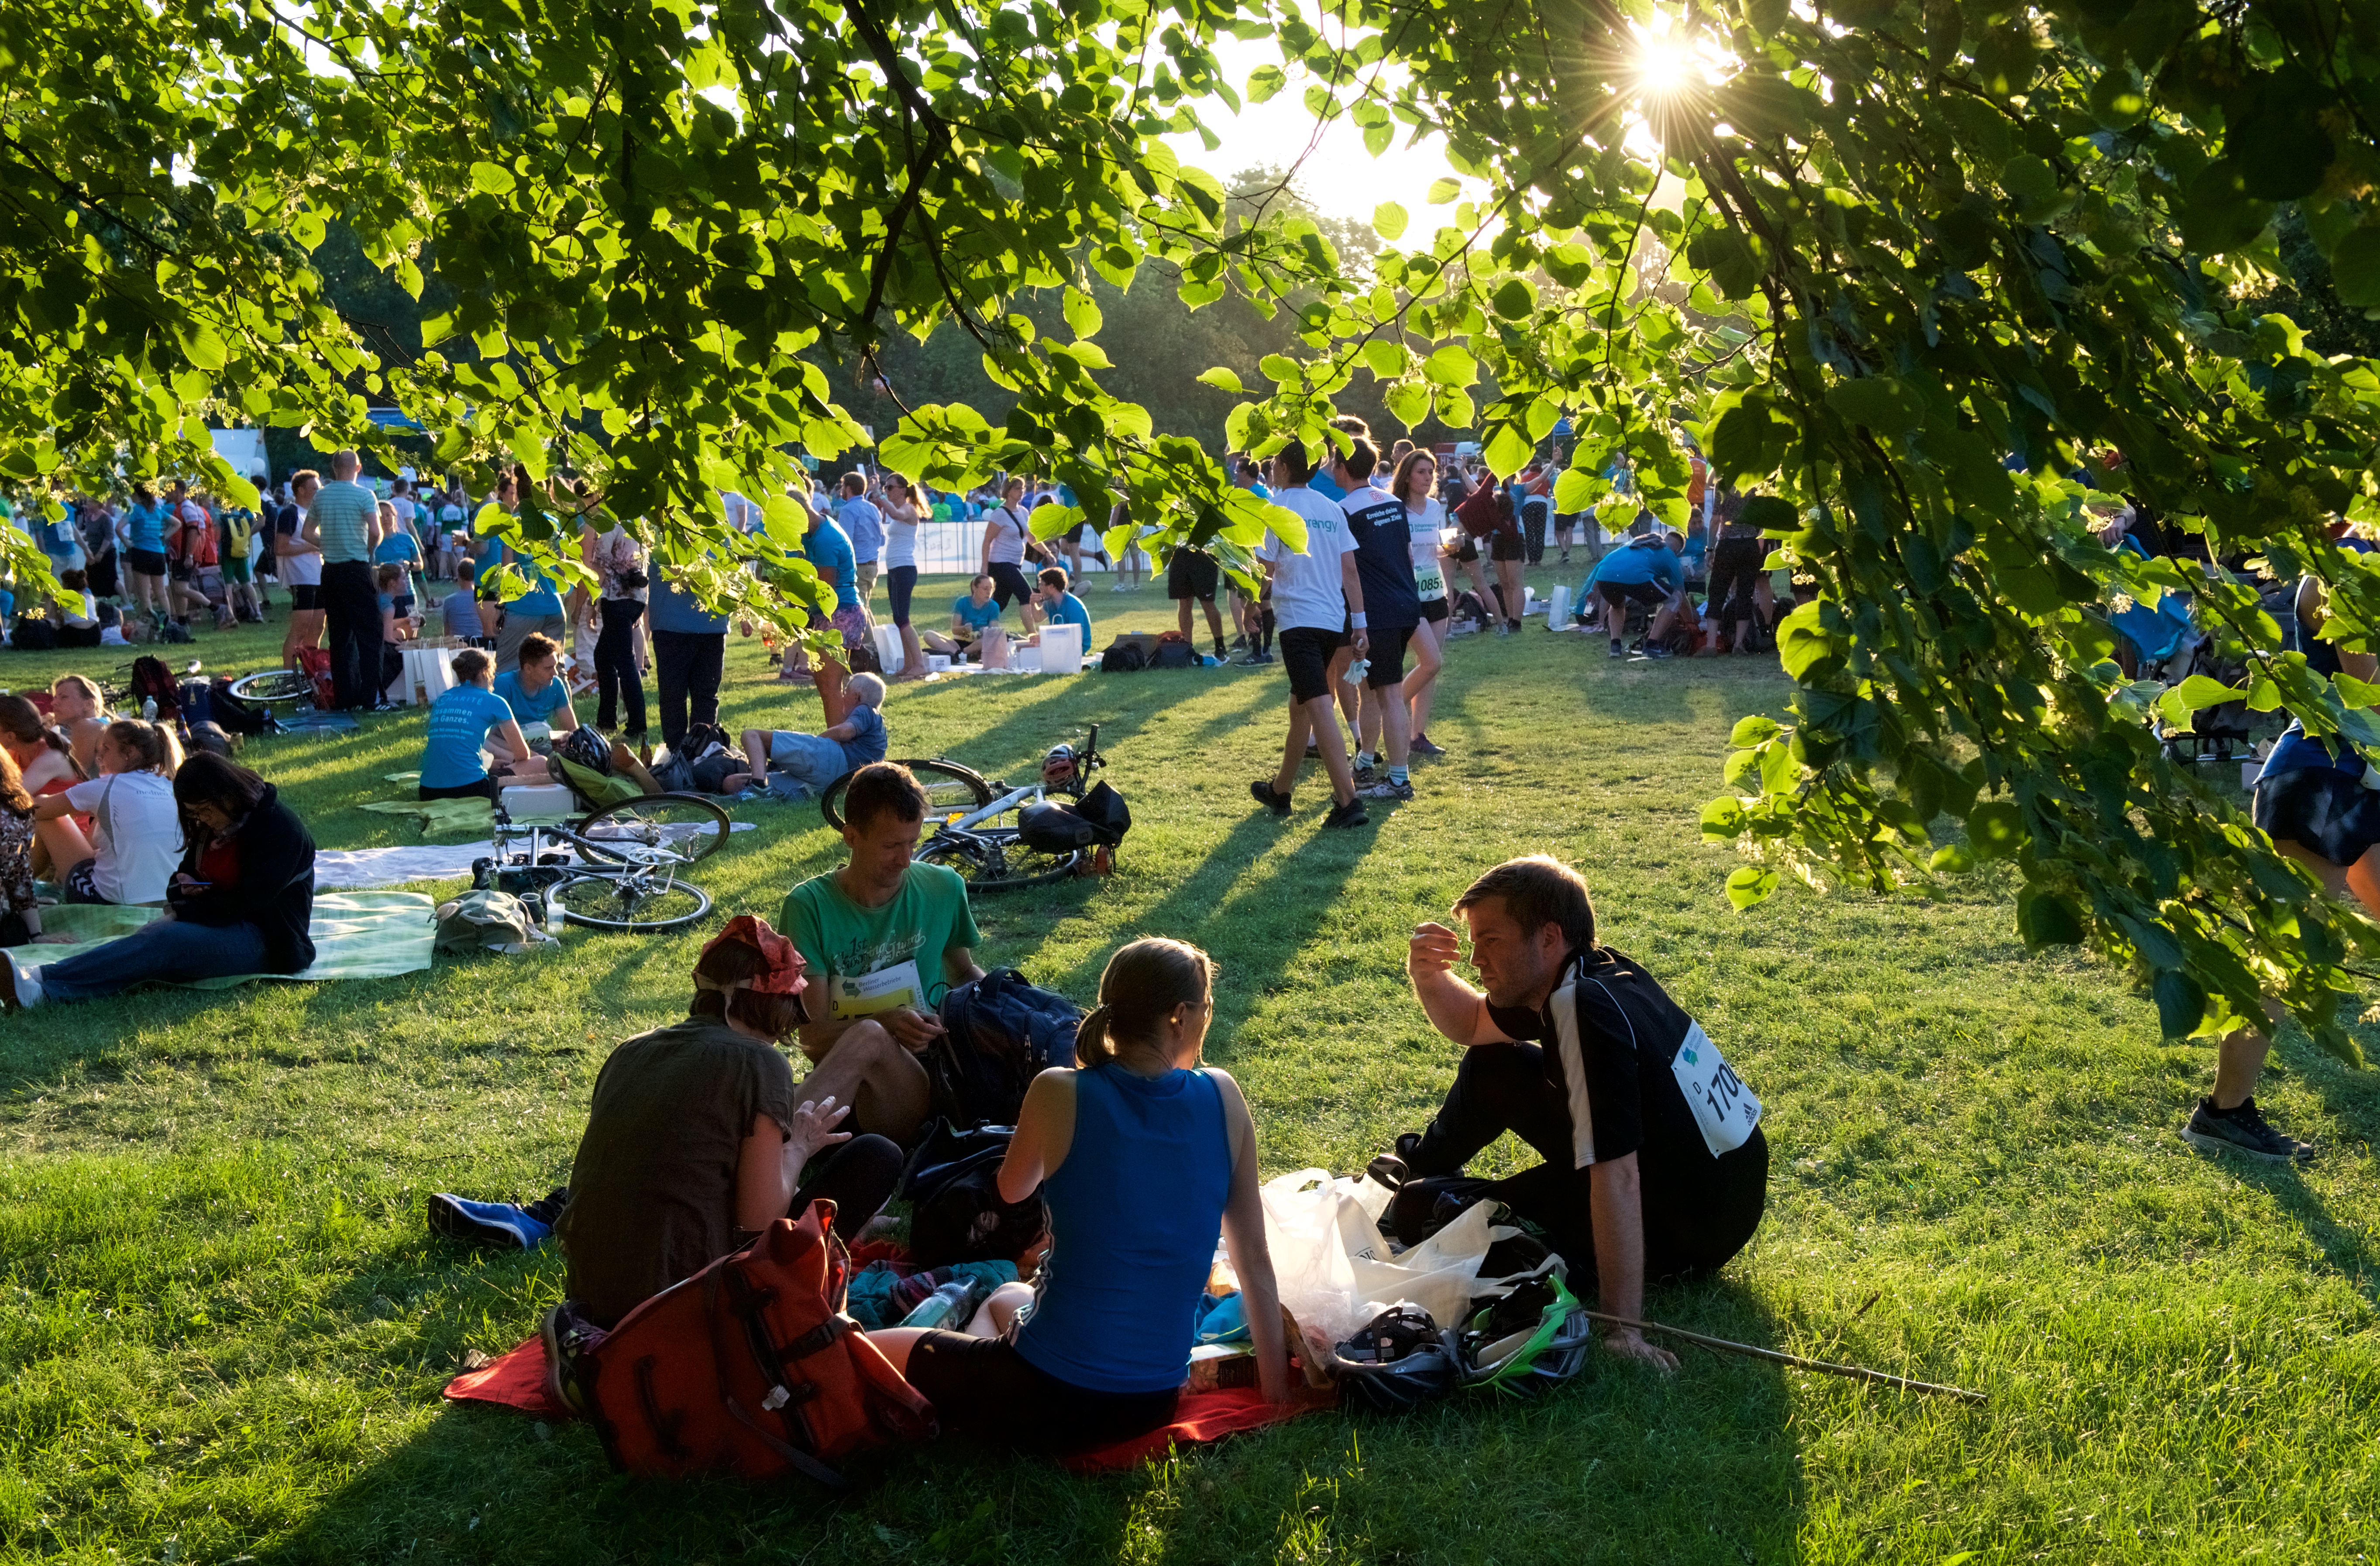 The green meadows also invited to the picnic in 2019 ©S CC EVENTS / Eberhard